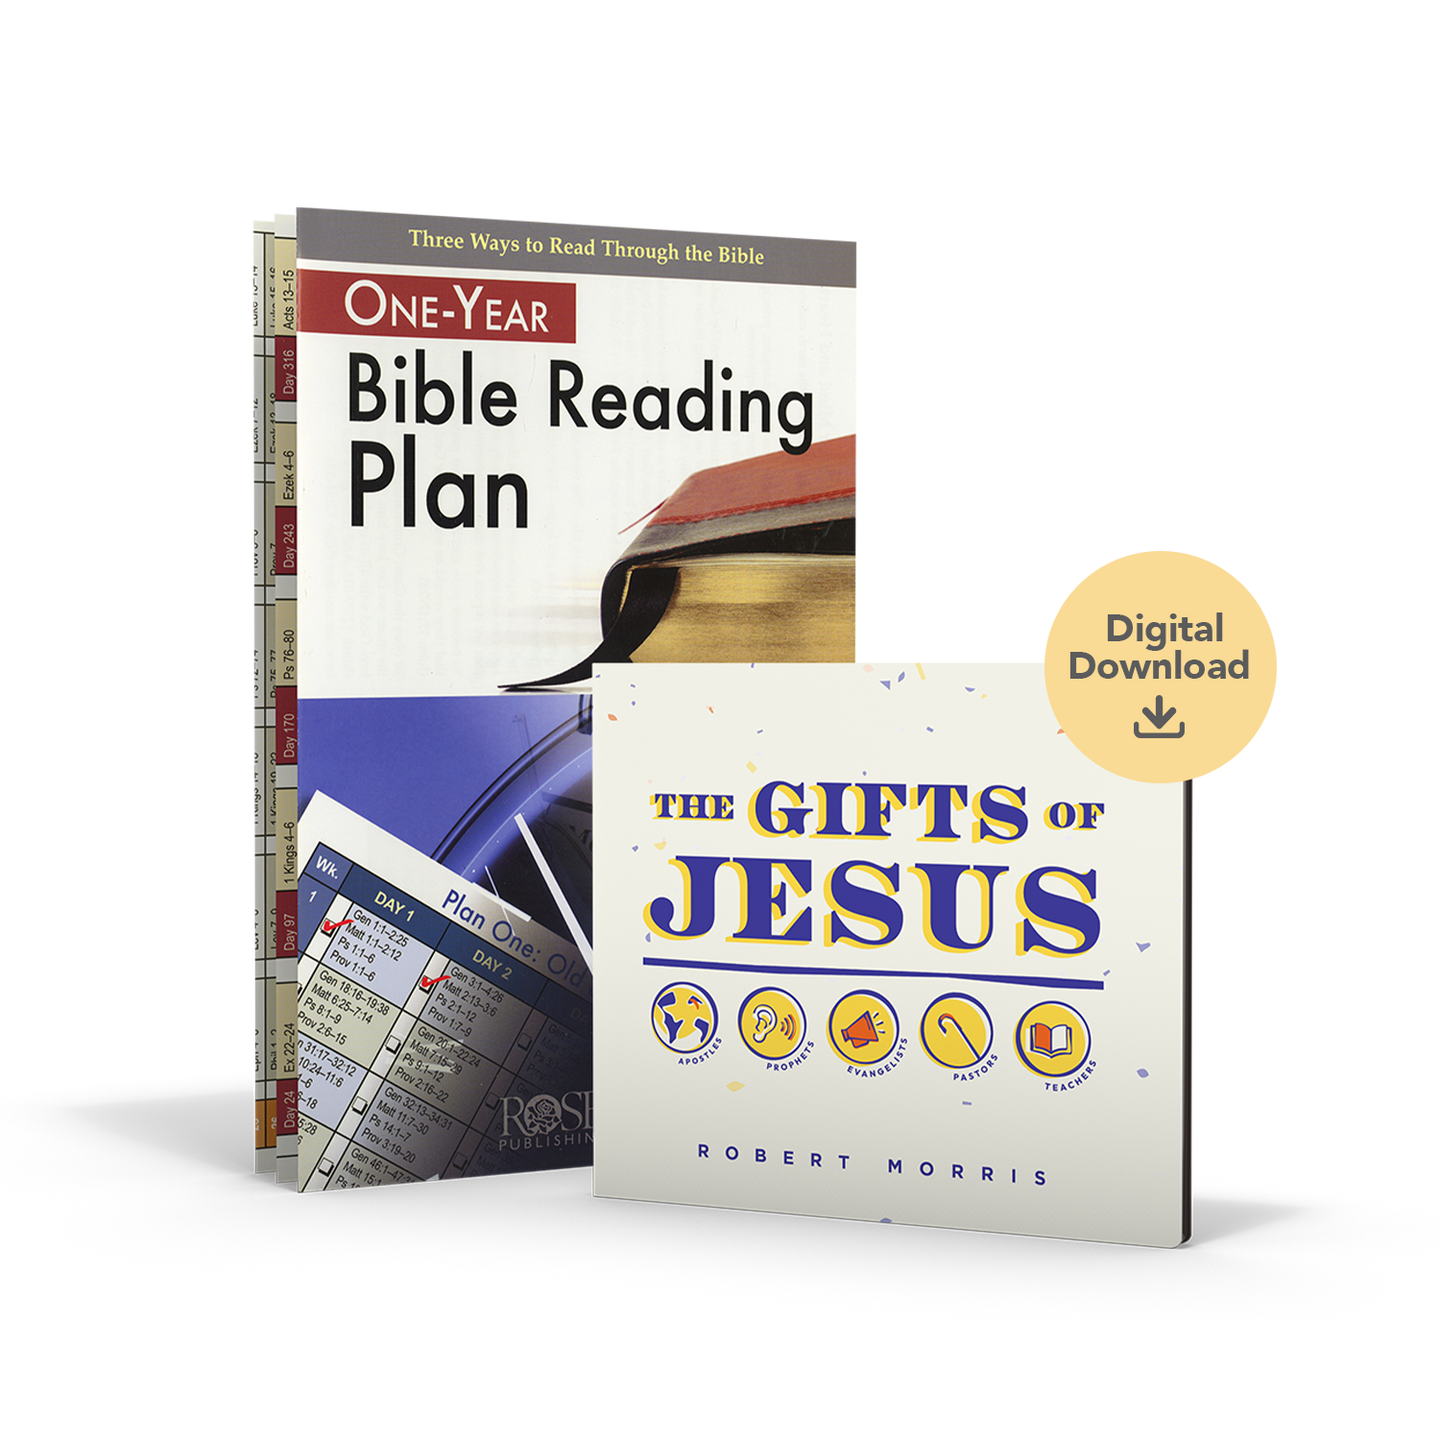 The Gifts of Jesus Special Digital Download Offer